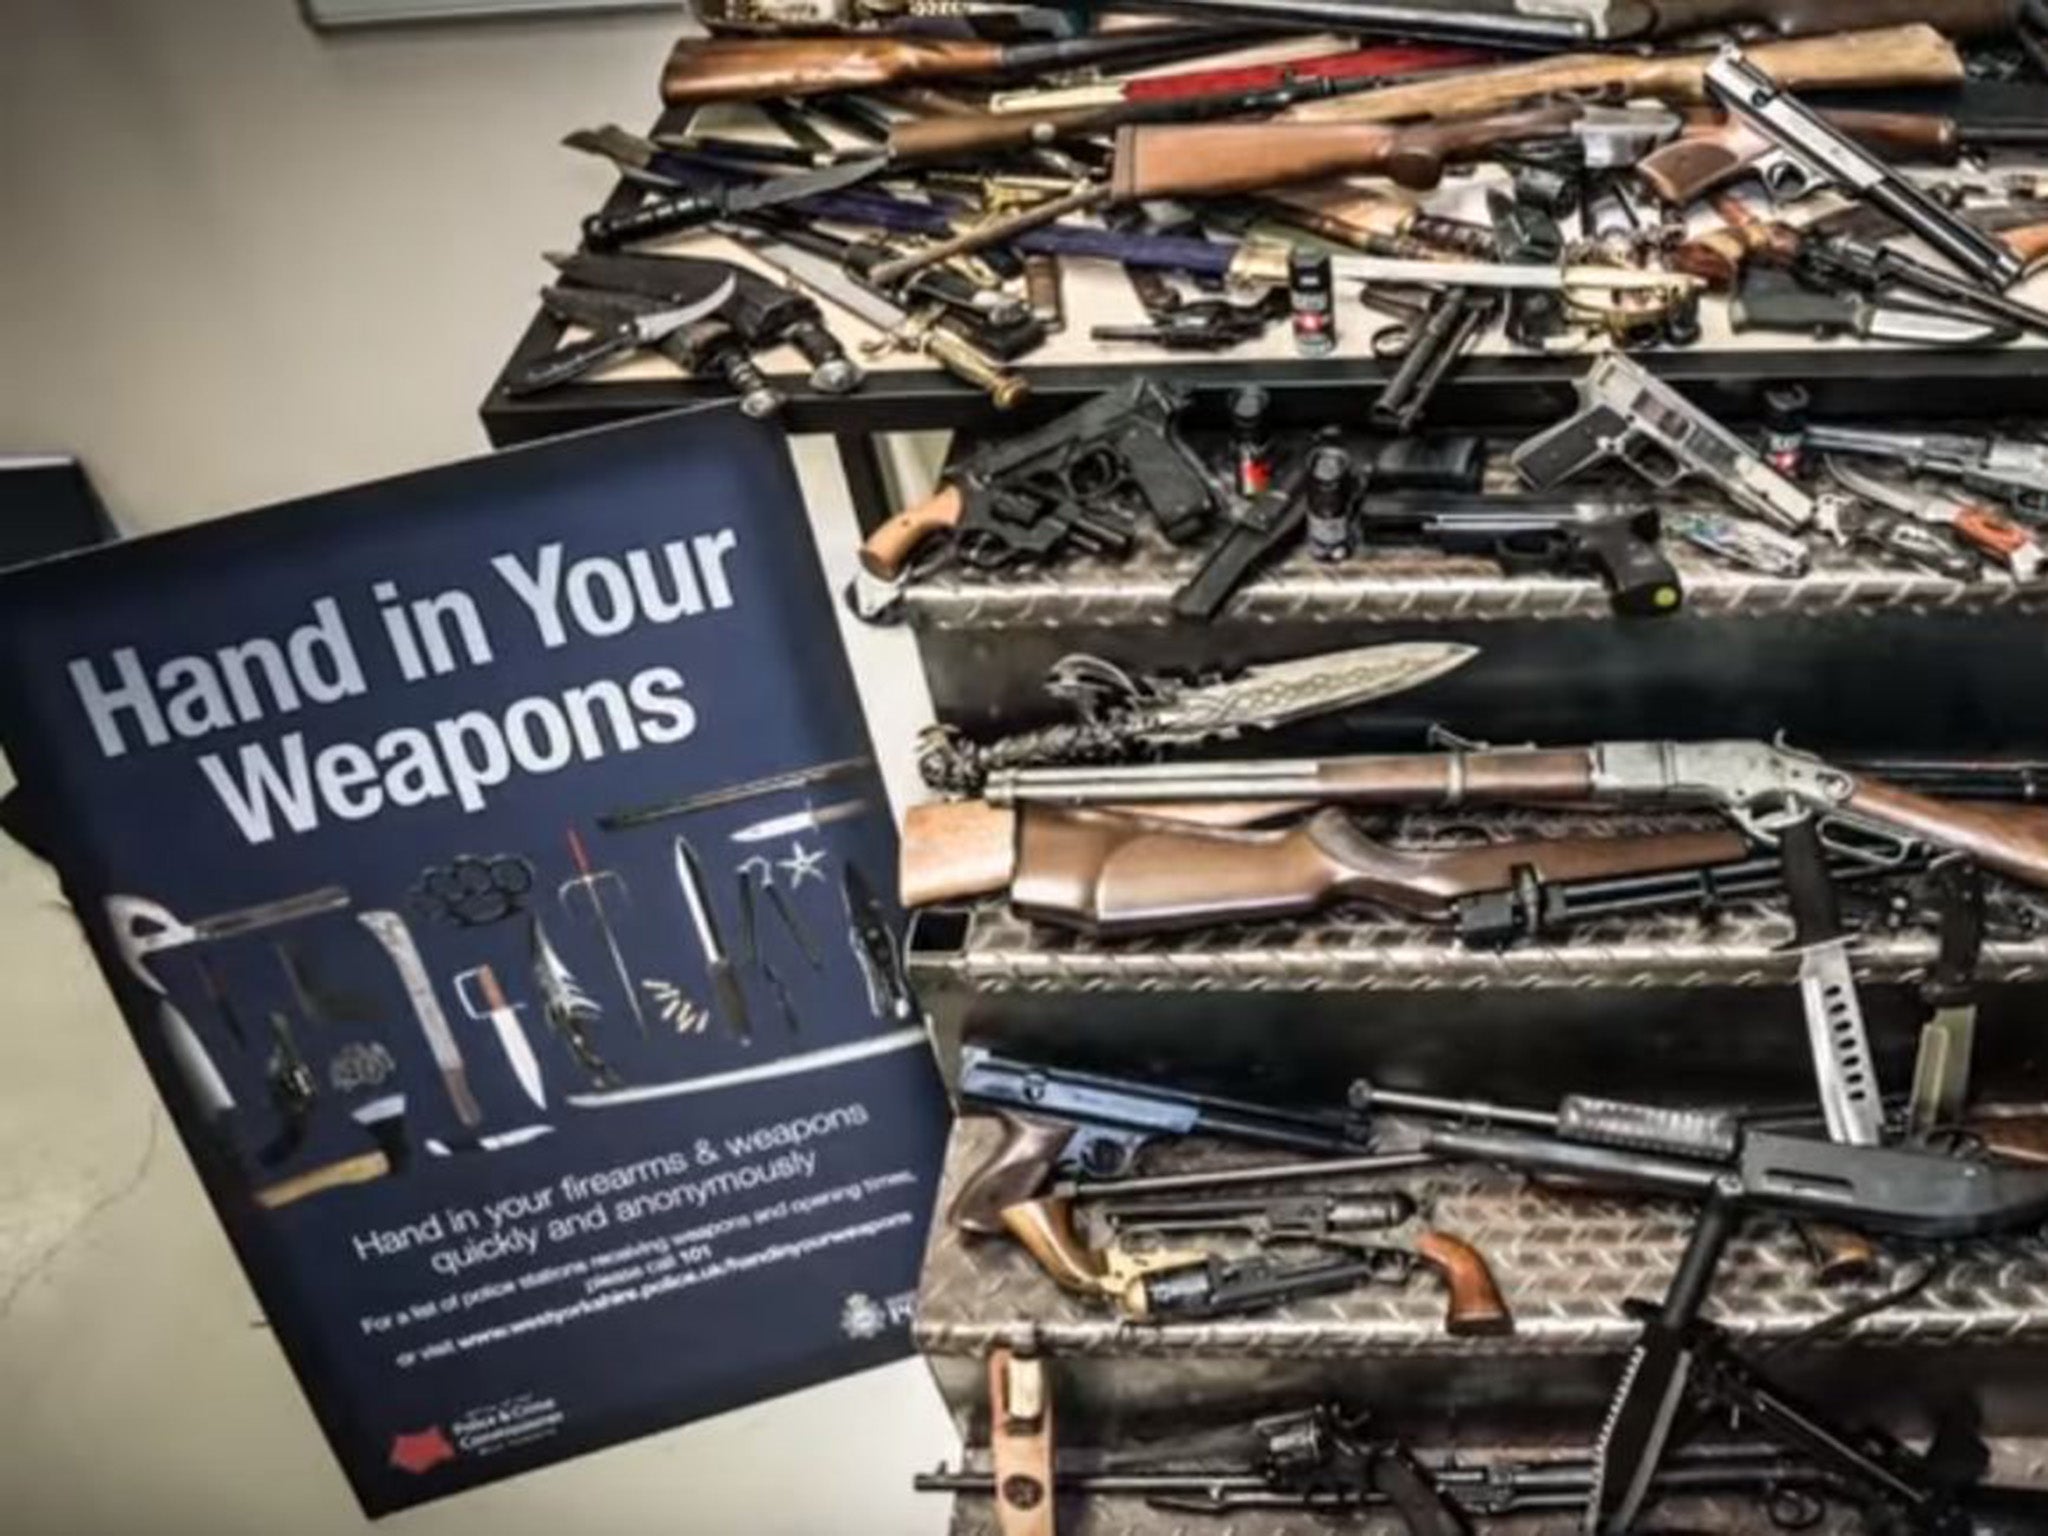 Some of the weapons handed into West Yorkshire Police